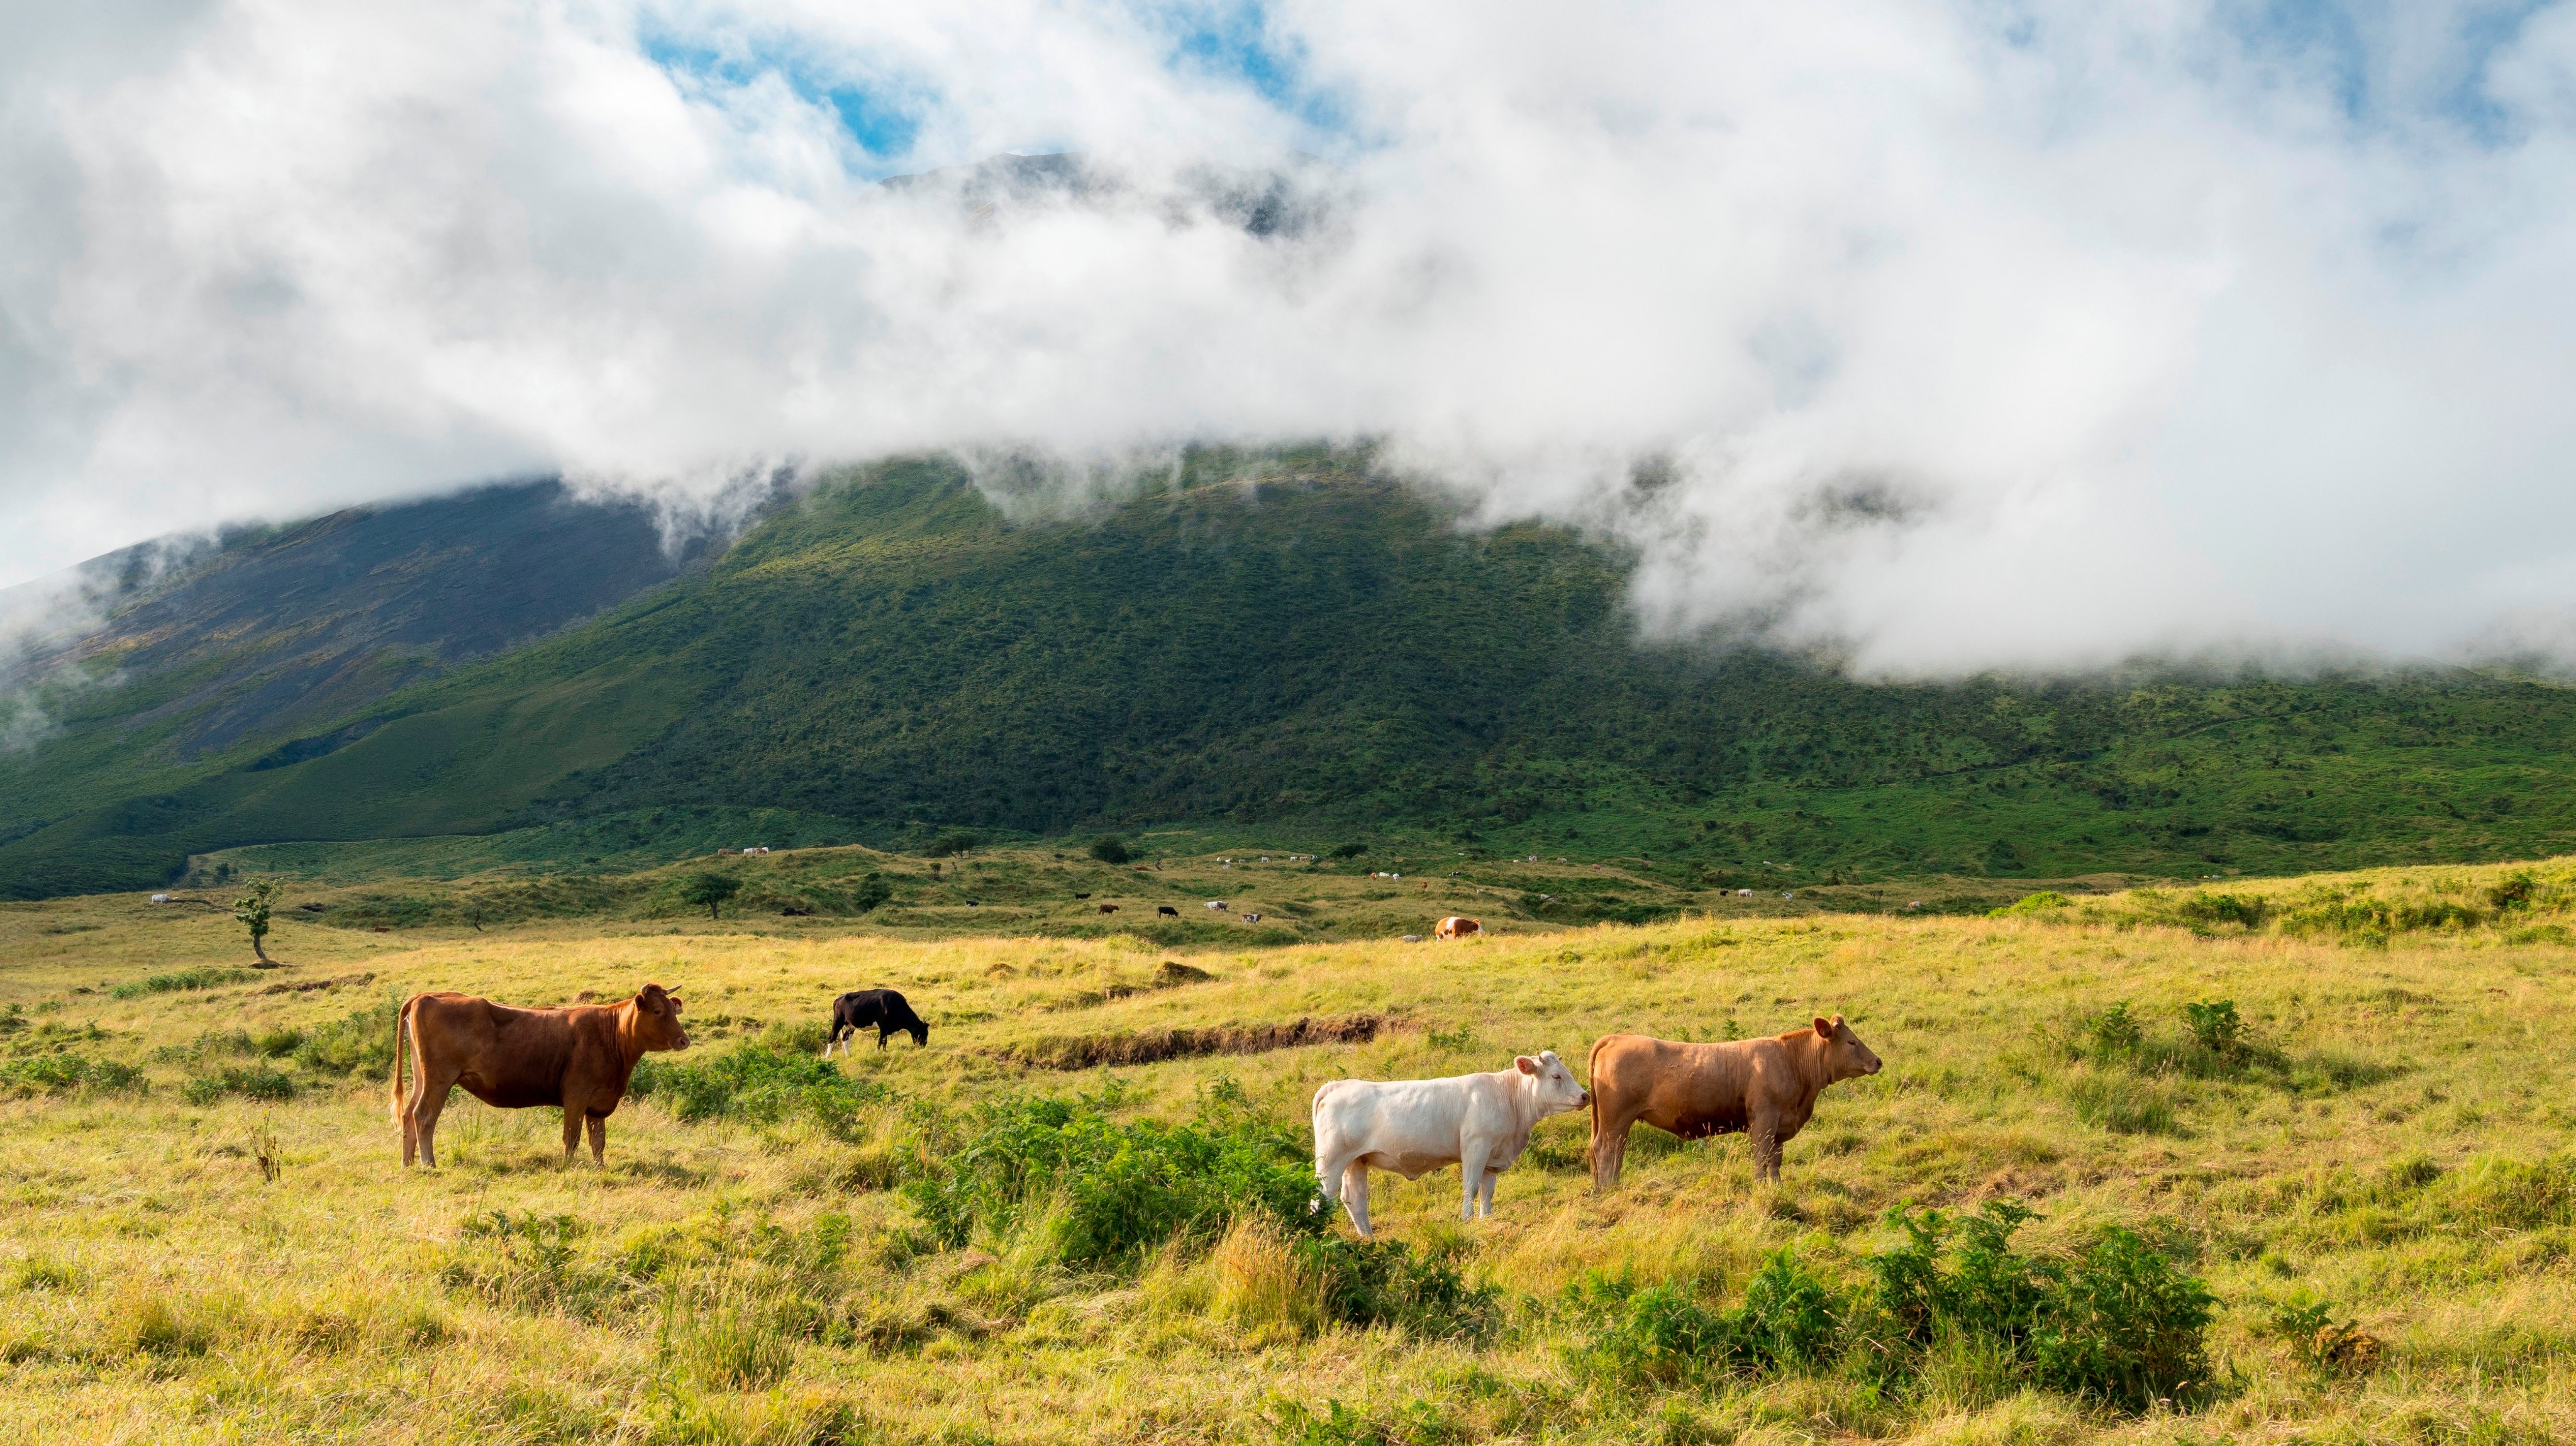 Vulcano Pico. pasture with cows. Pico Island. an island in the Azores (Ilhas dos Acores) in the Atlantic ocean. The Azores are an autonomous region of Portugal. Europe. Portugal. Azores